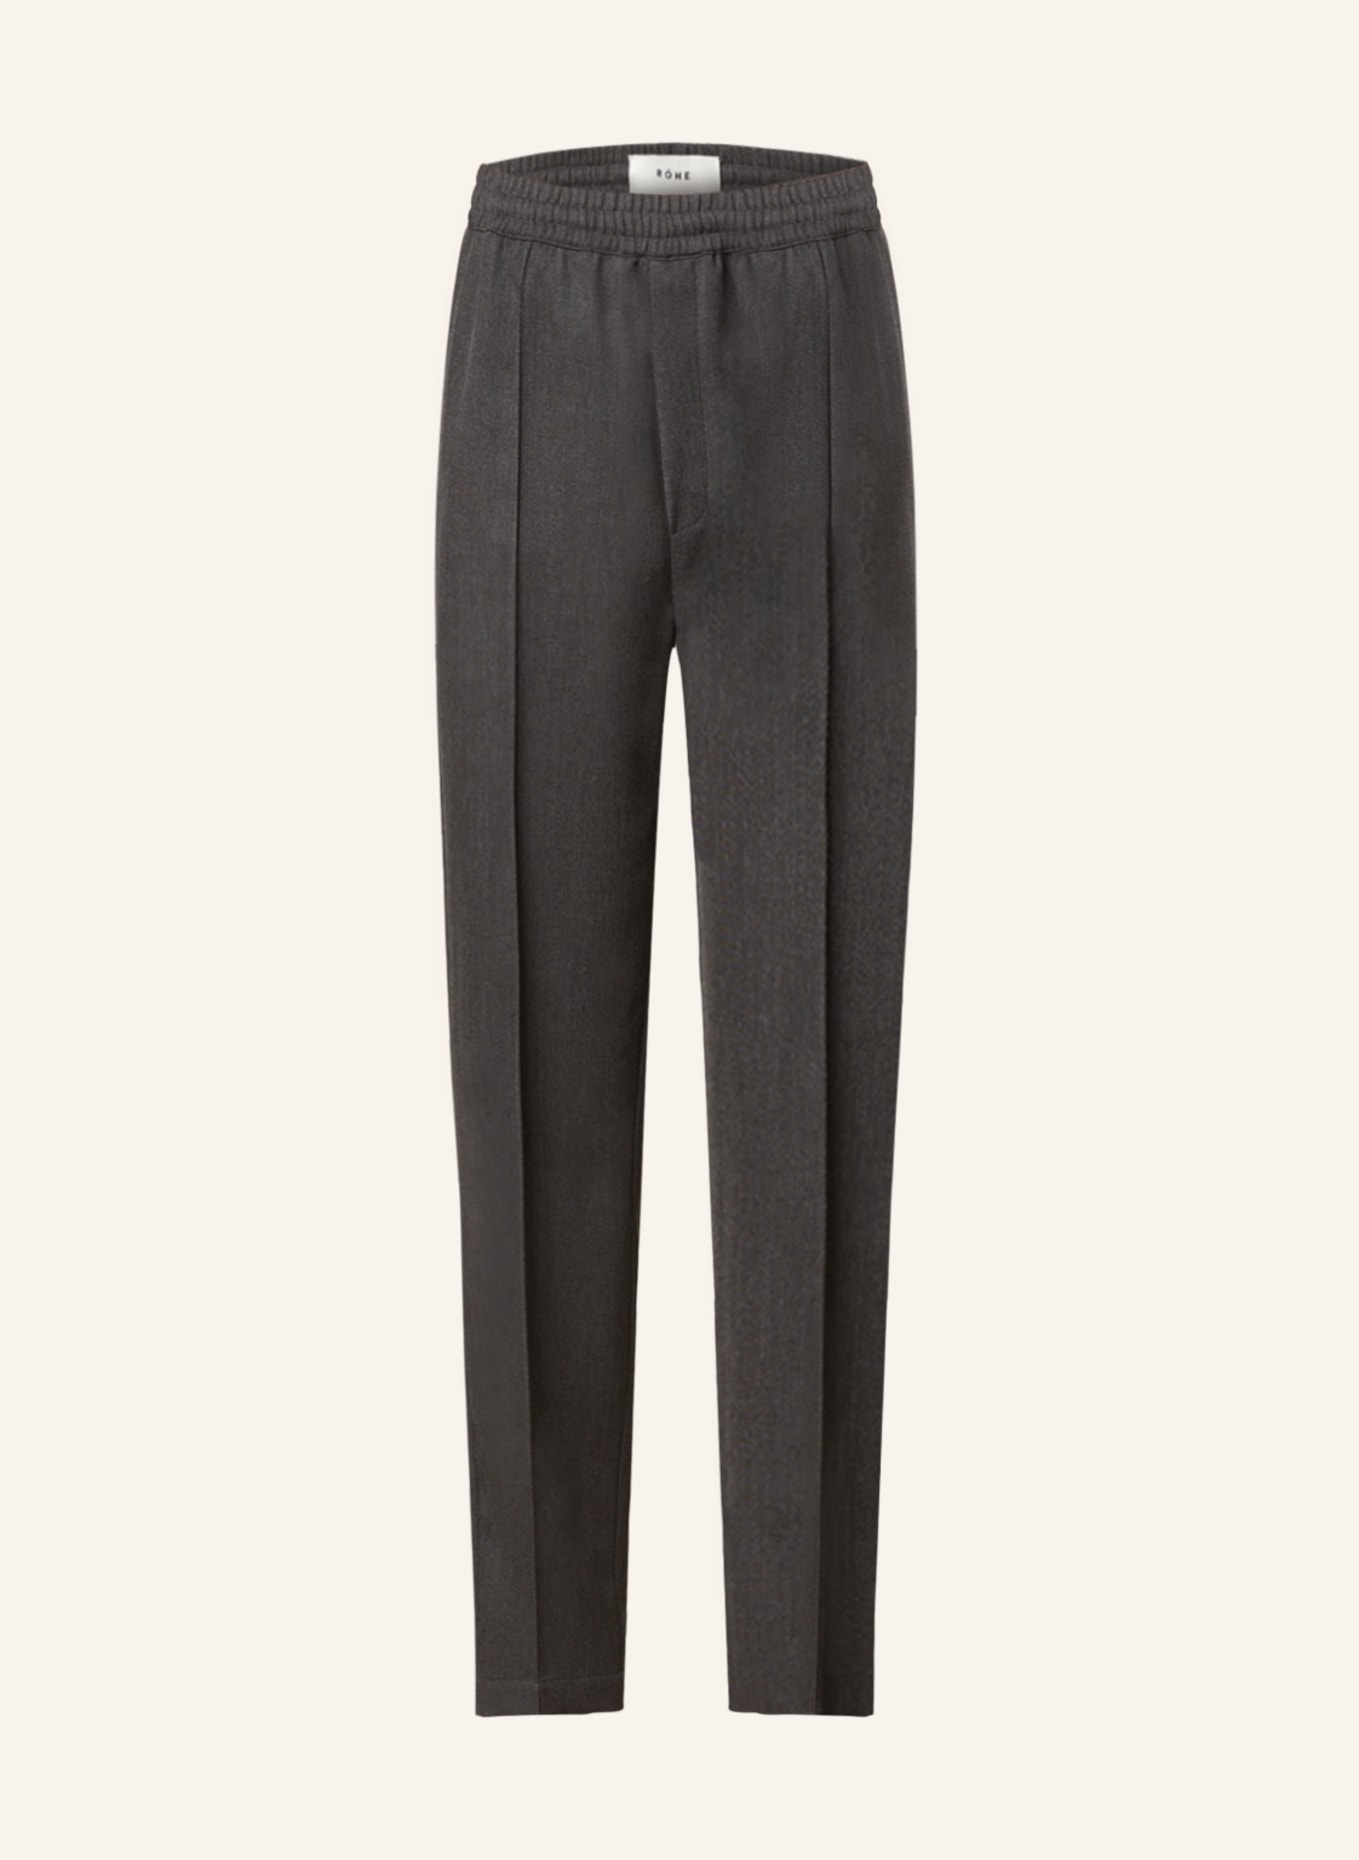 RÓHE Pants in jogger style, Color: GRAY (Image 1)